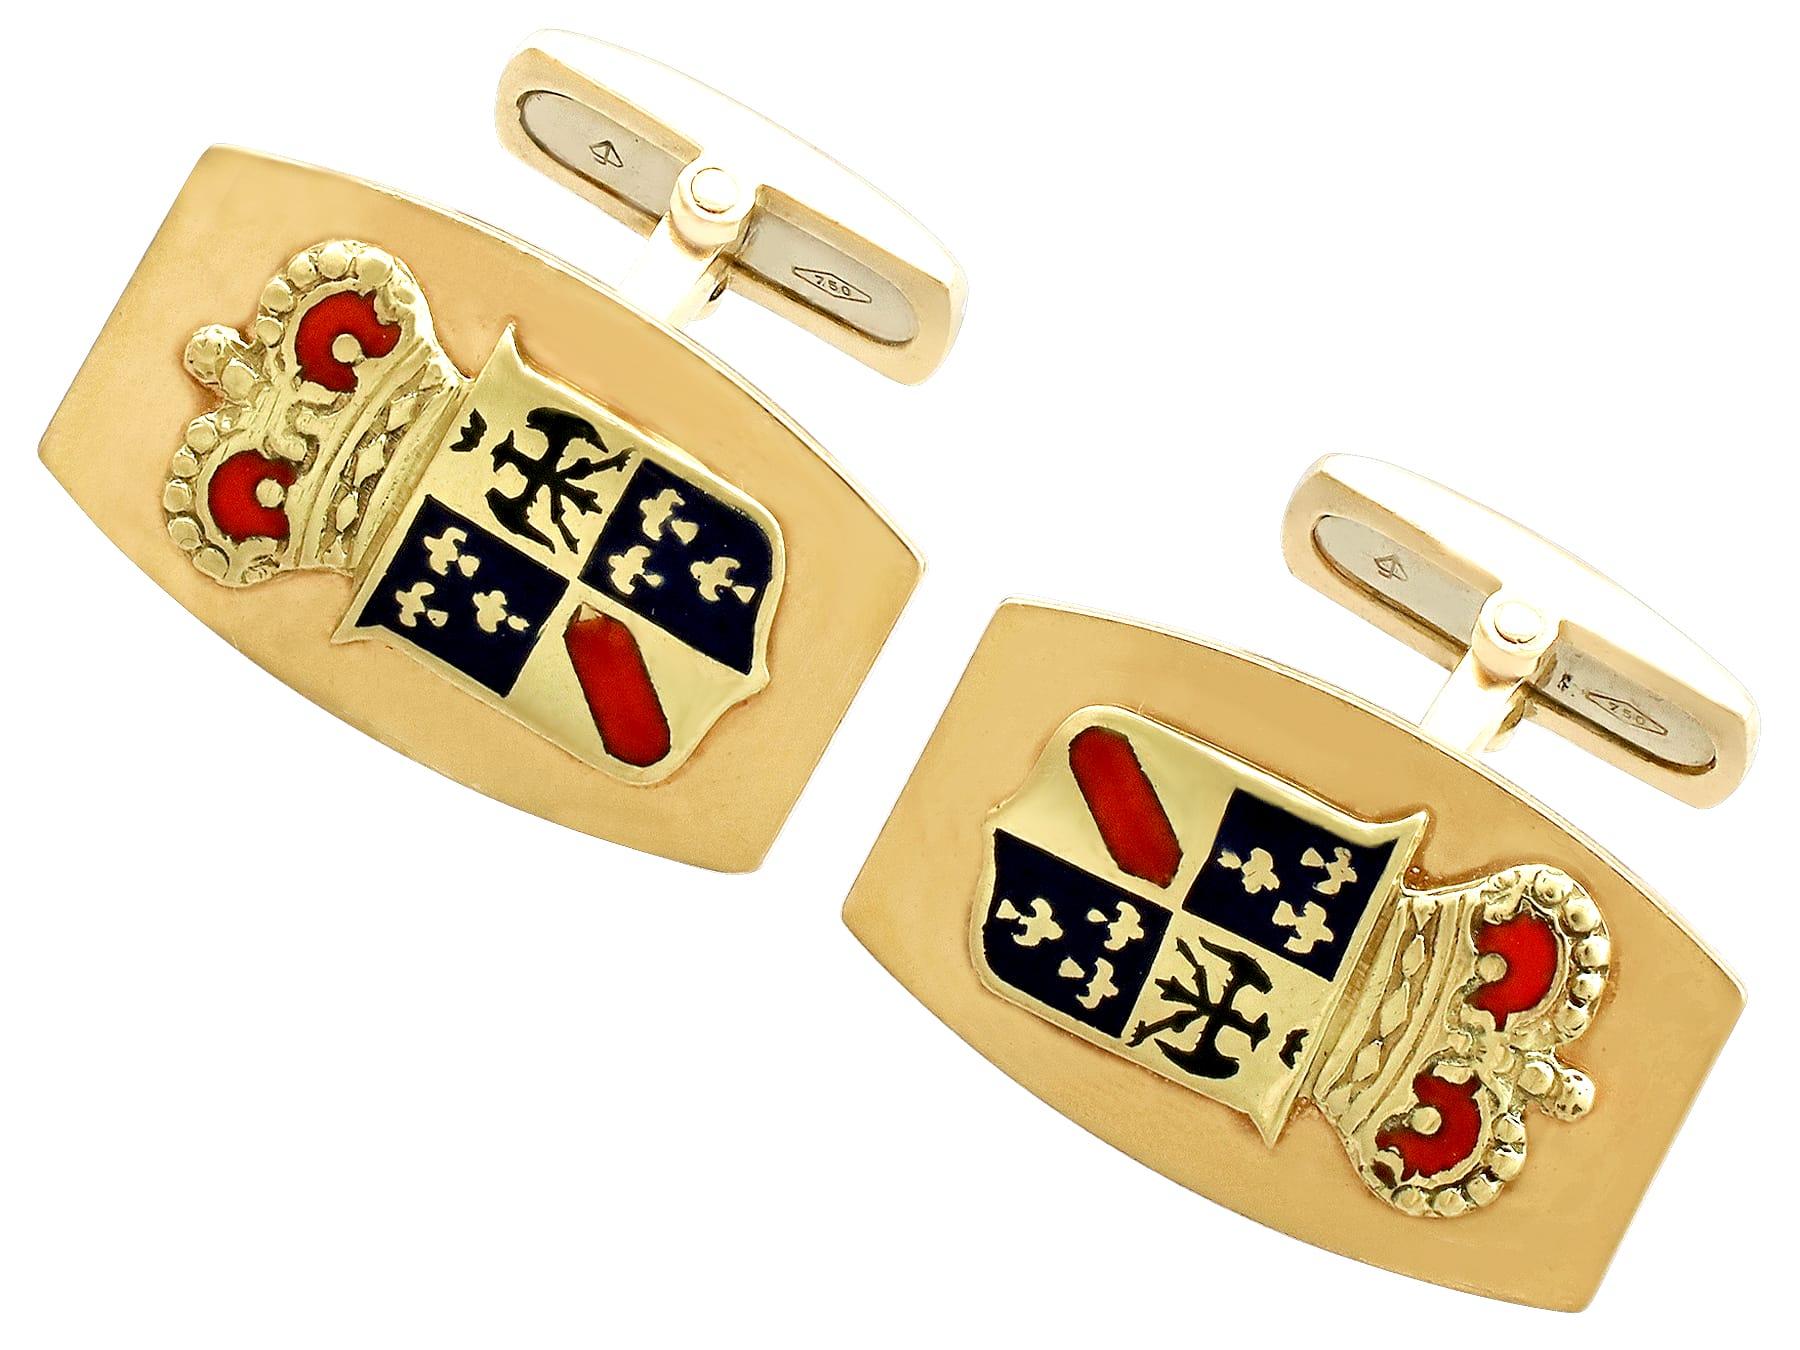 A fine and impressive pair of vintage 9 karat yellow gold and enamel cufflinks; part of our men's jewelry and estate jewelry collections.

These fine and impressive vintage cufflinks have been crafted in 9k yellow gold.

The cufflinks have a barrel